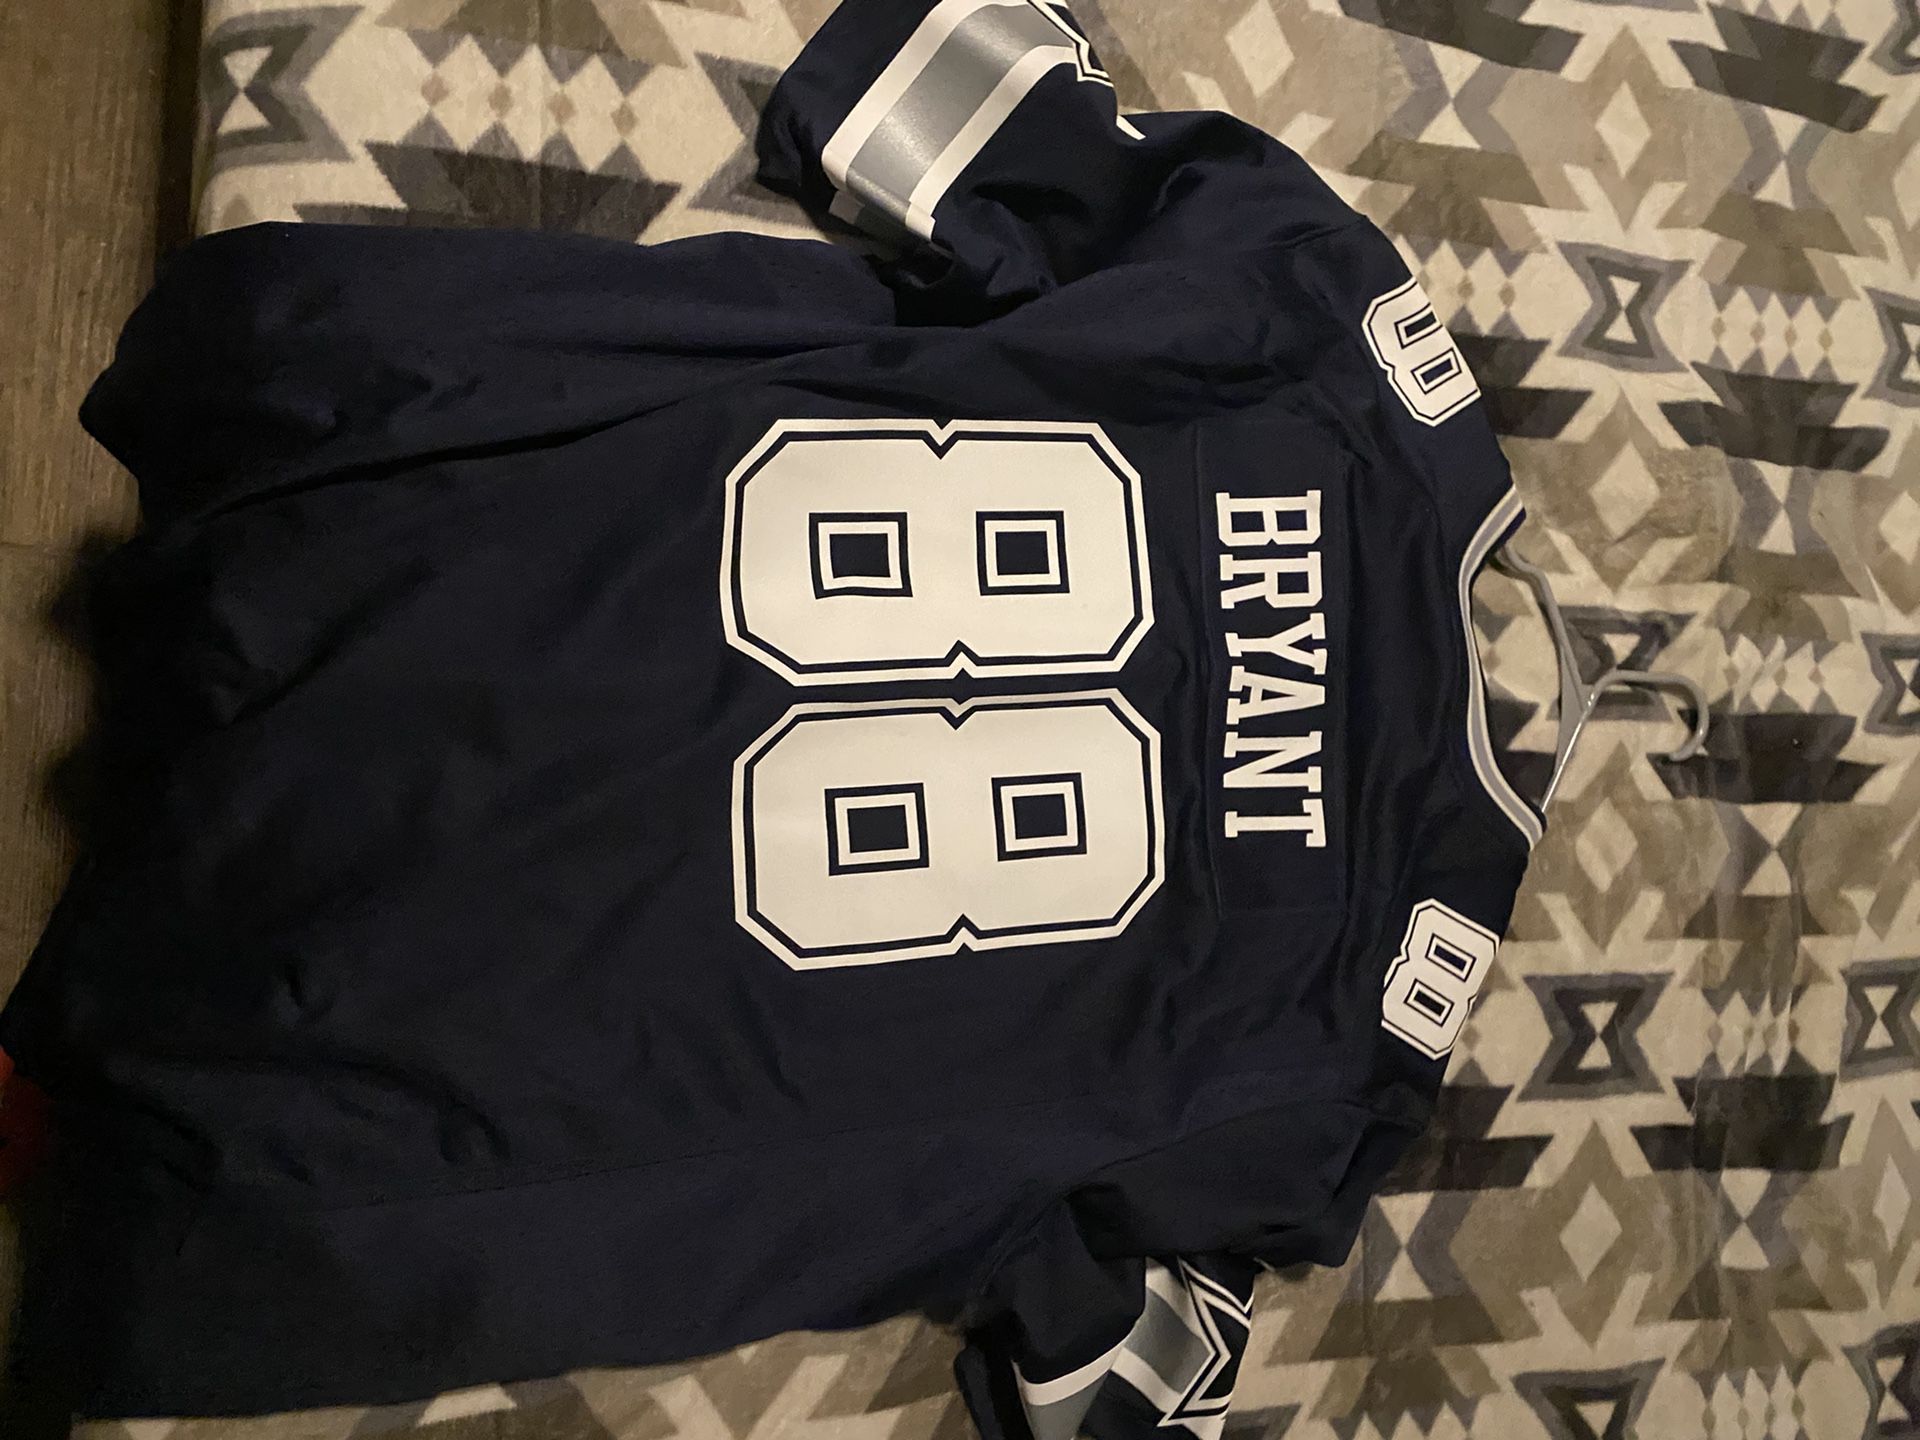 Dez Bryant Jerseys for Sale in Fort Worth, TX - OfferUp